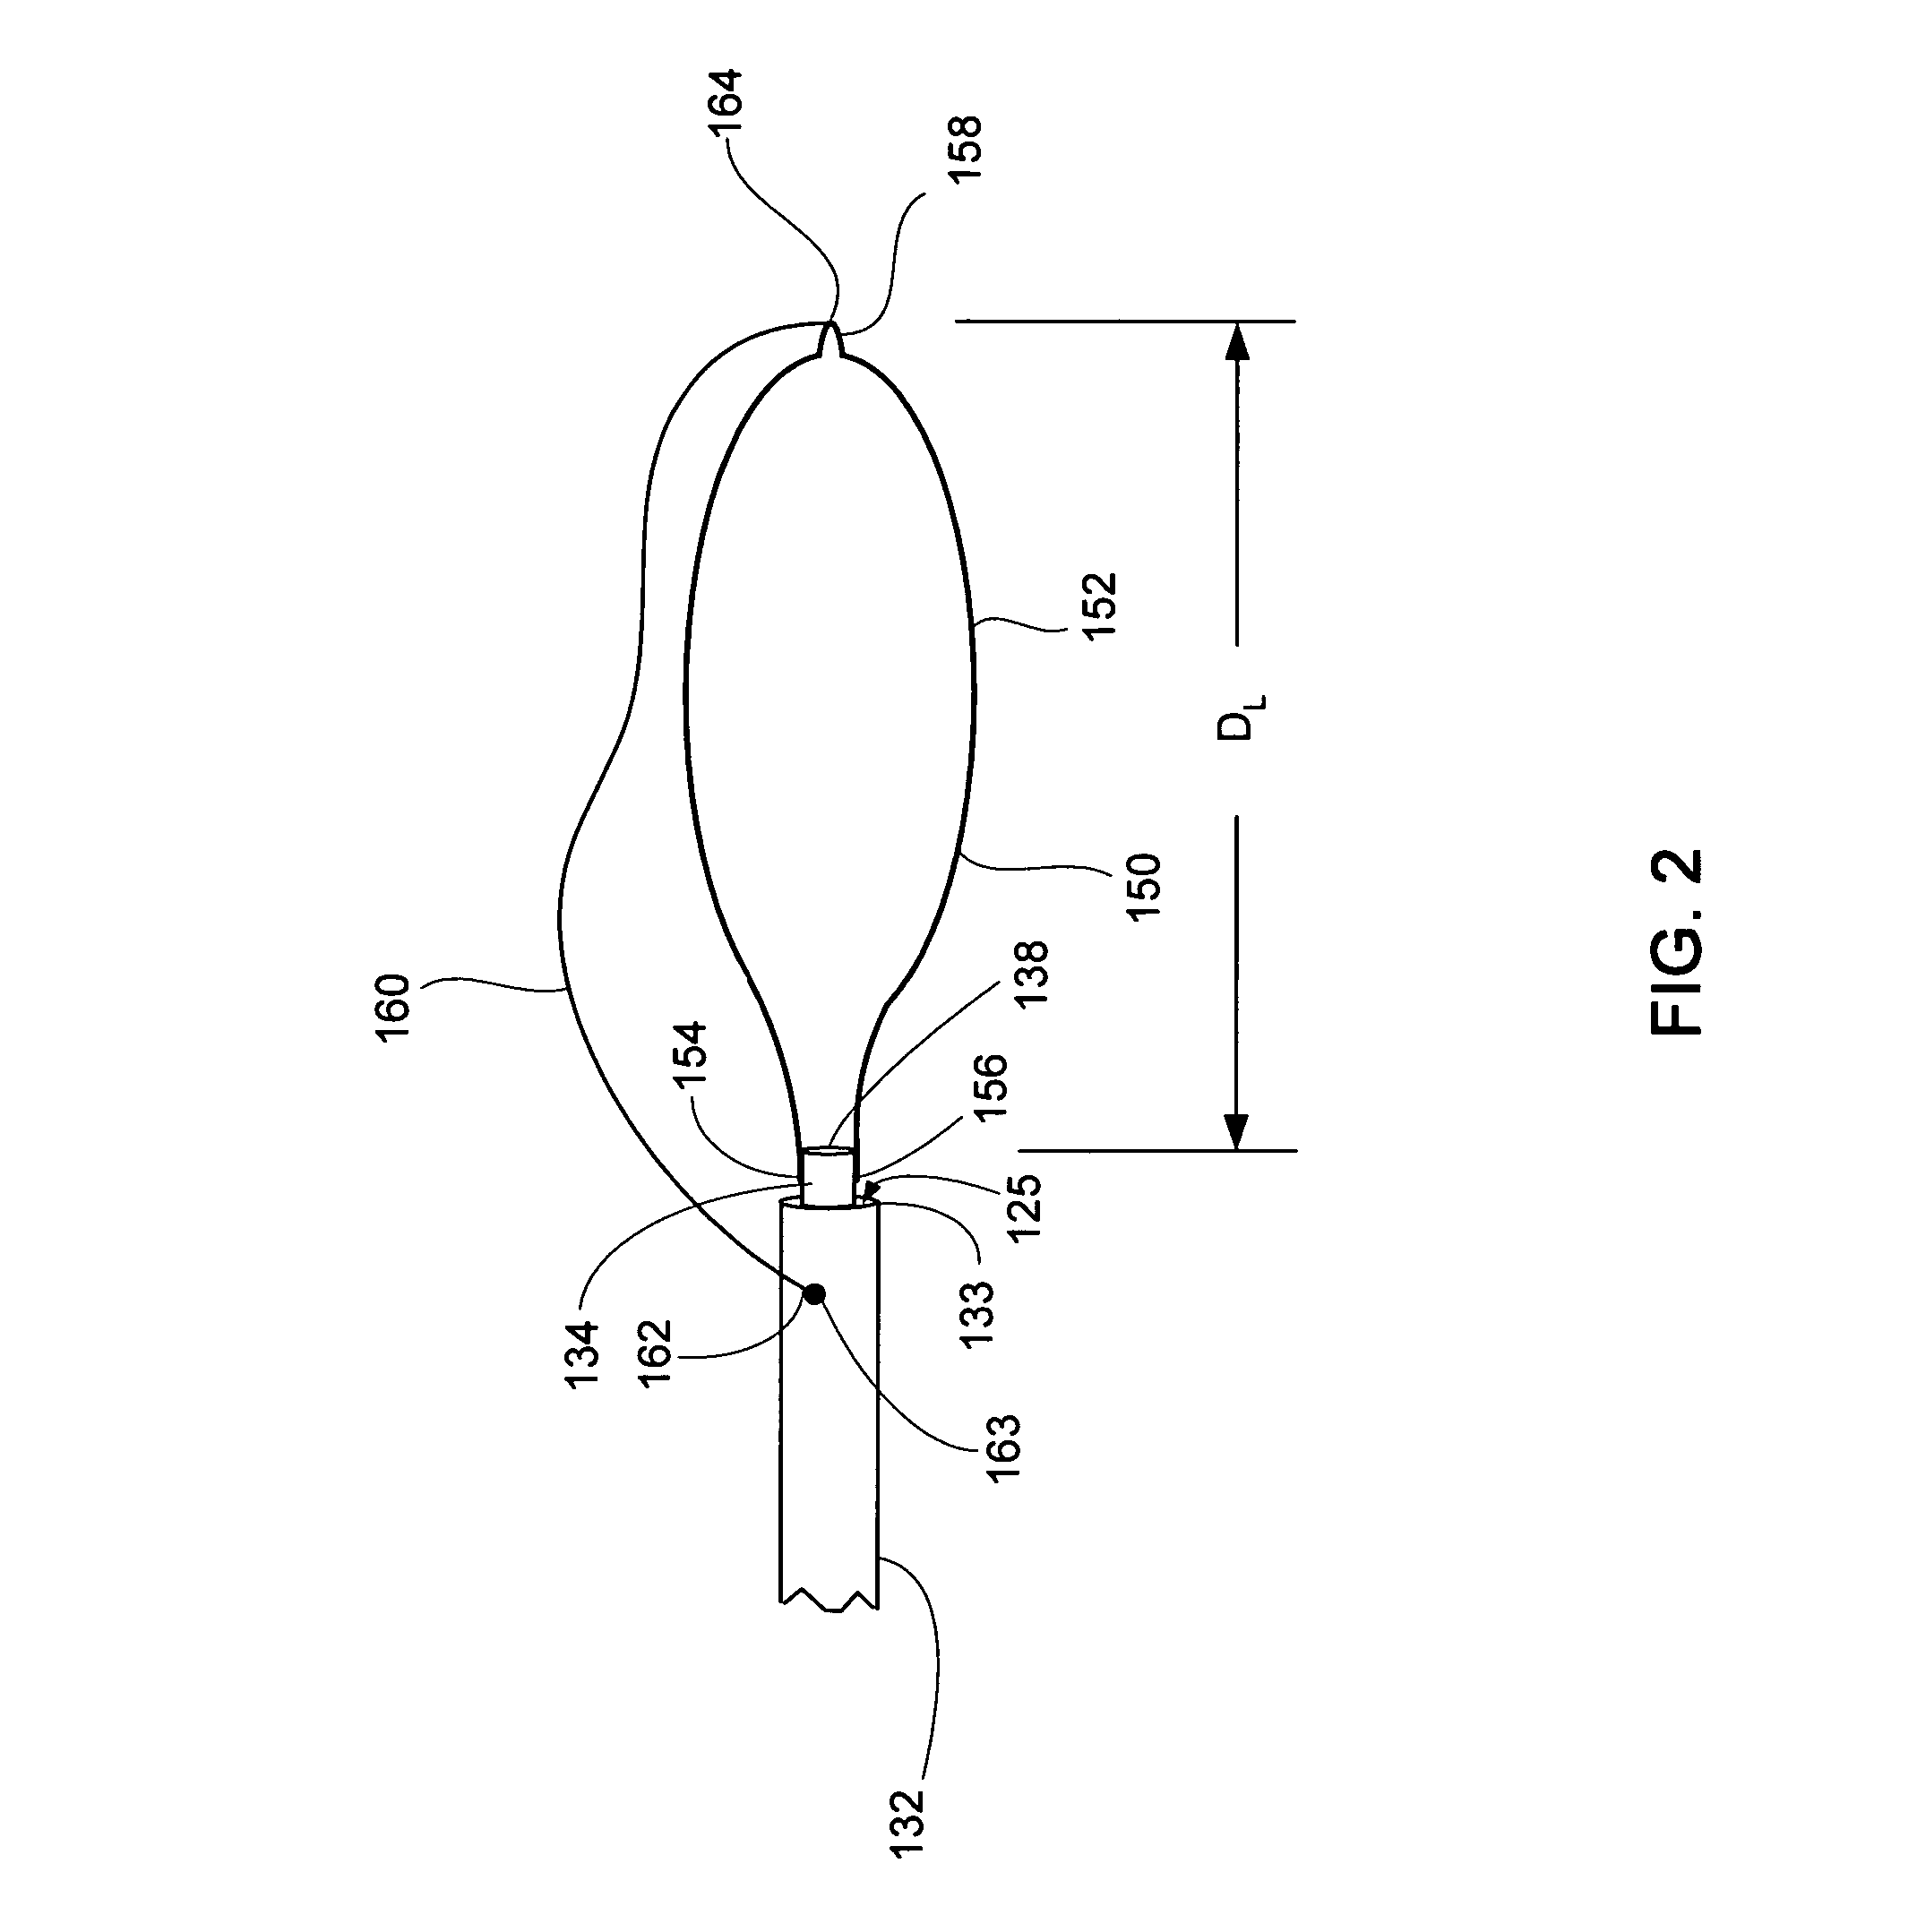 Automatically deforming surgical snare